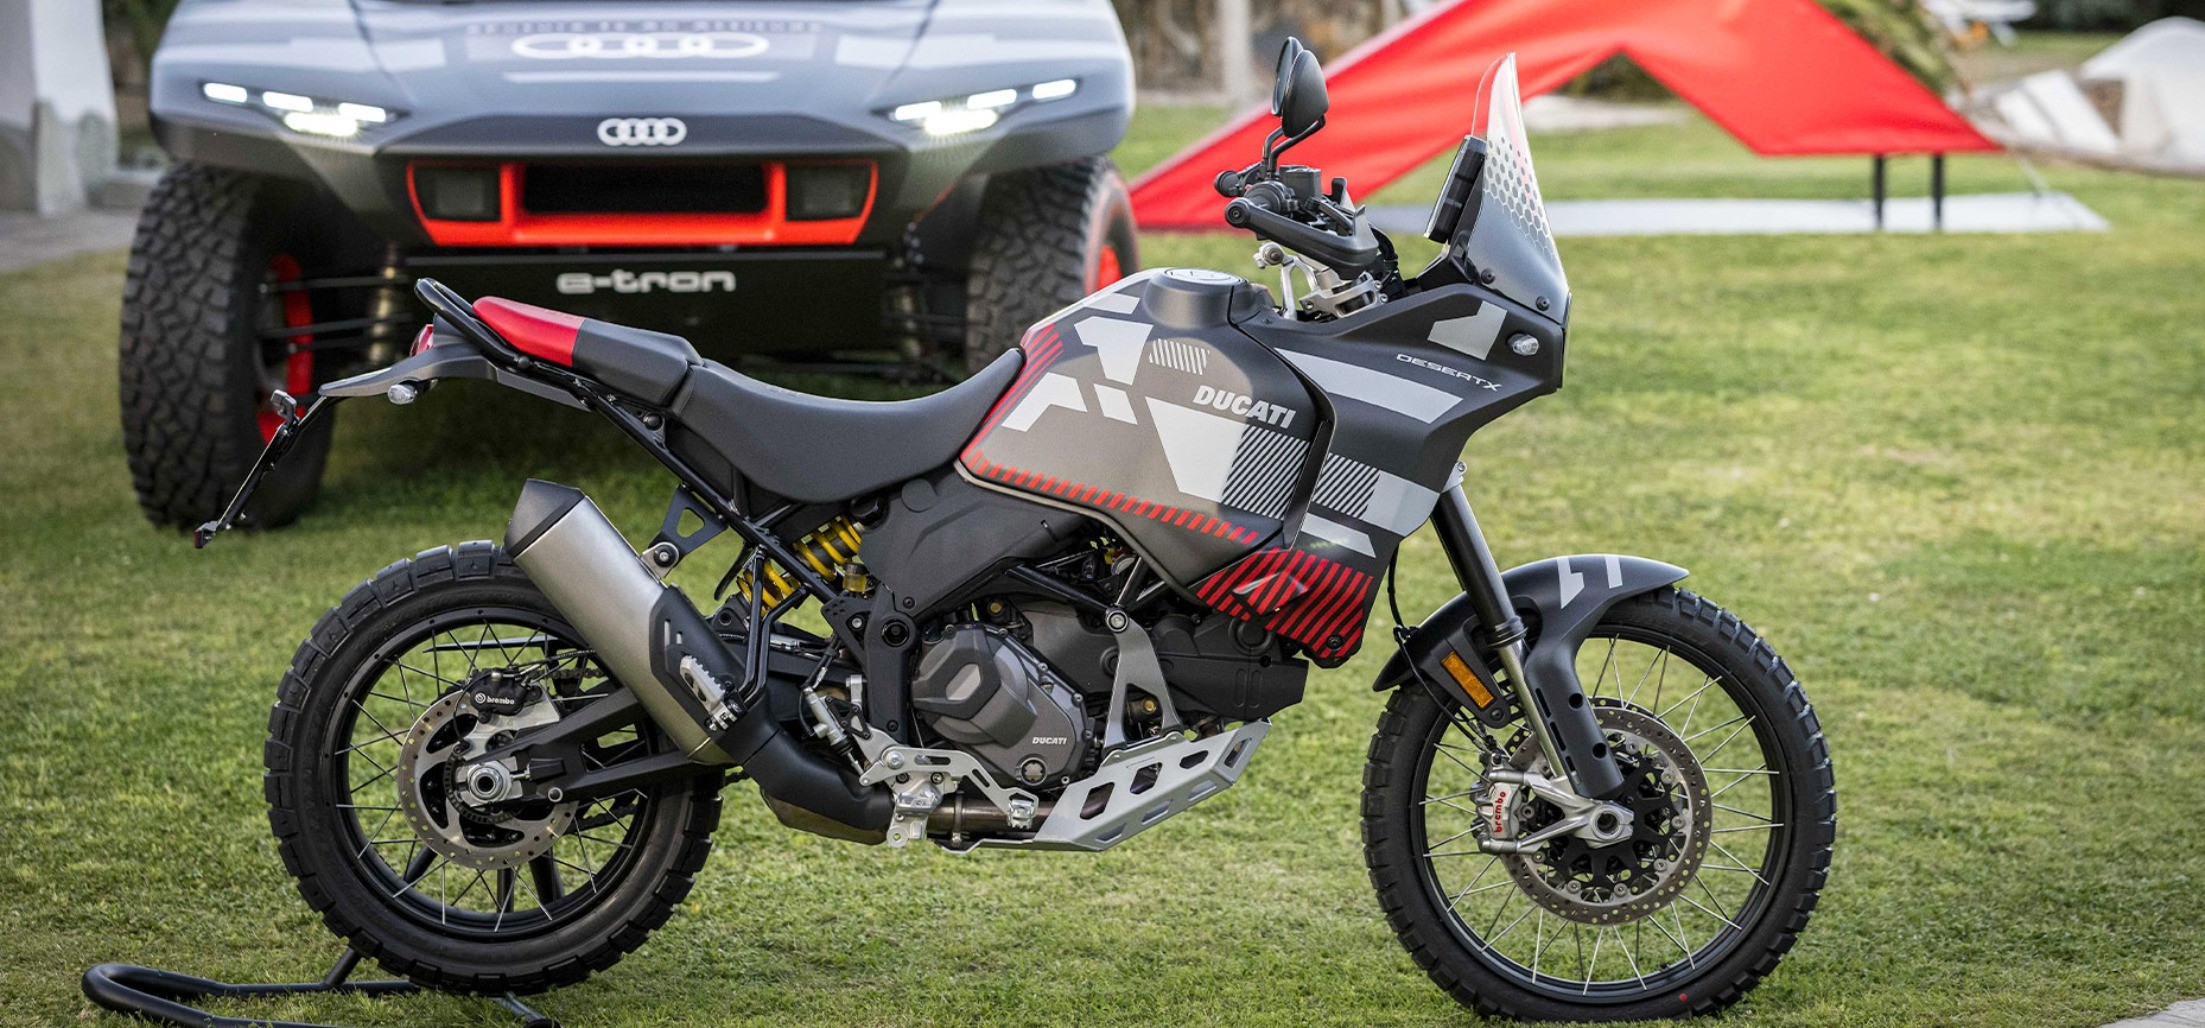 Ducati and Audi together